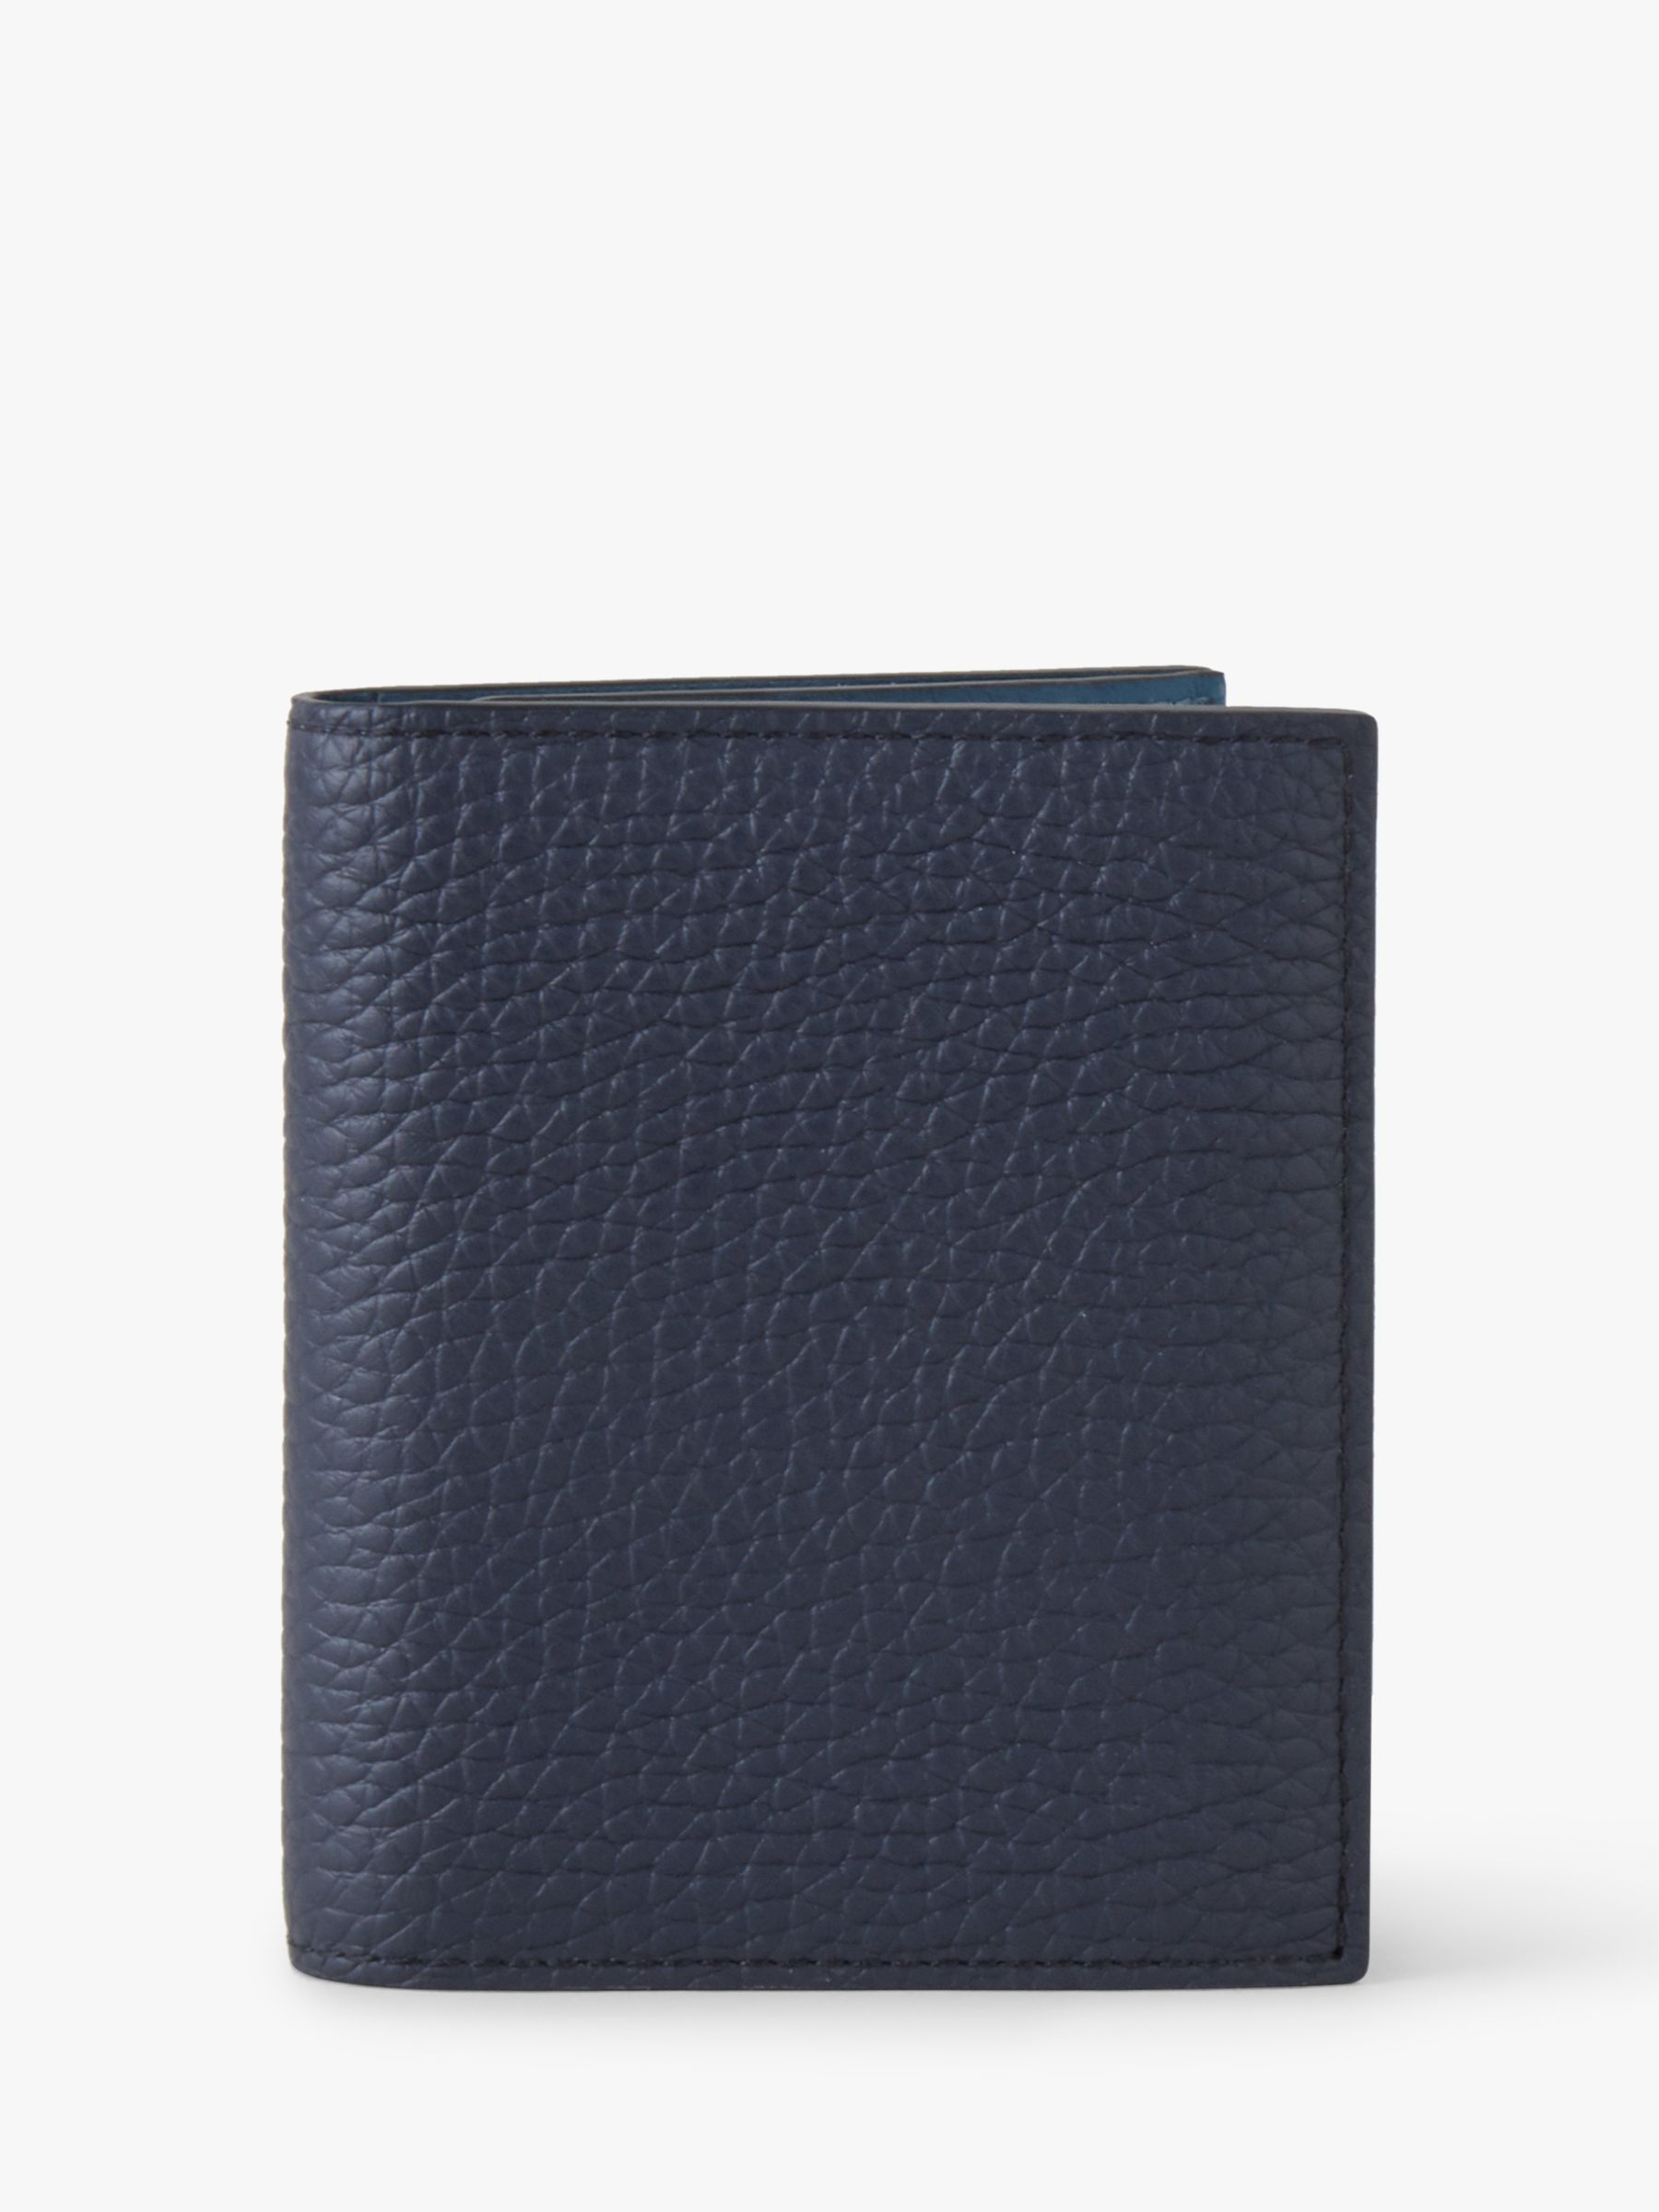 Mulberry Heavy Grained Leather Tri-fold Wallet